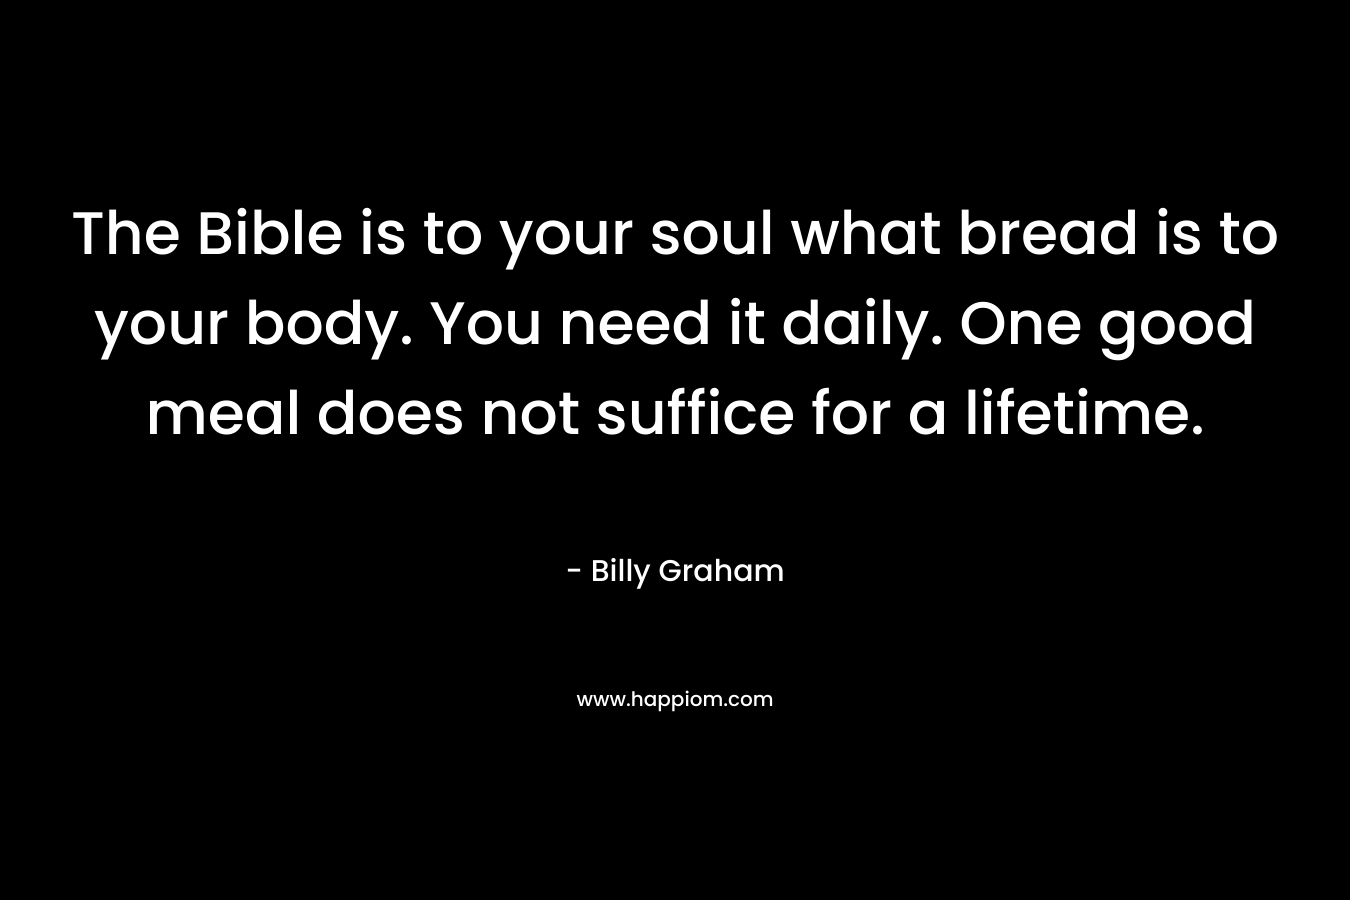 The Bible is to your soul what bread is to your body. You need it daily. One good meal does not suffice for a lifetime.